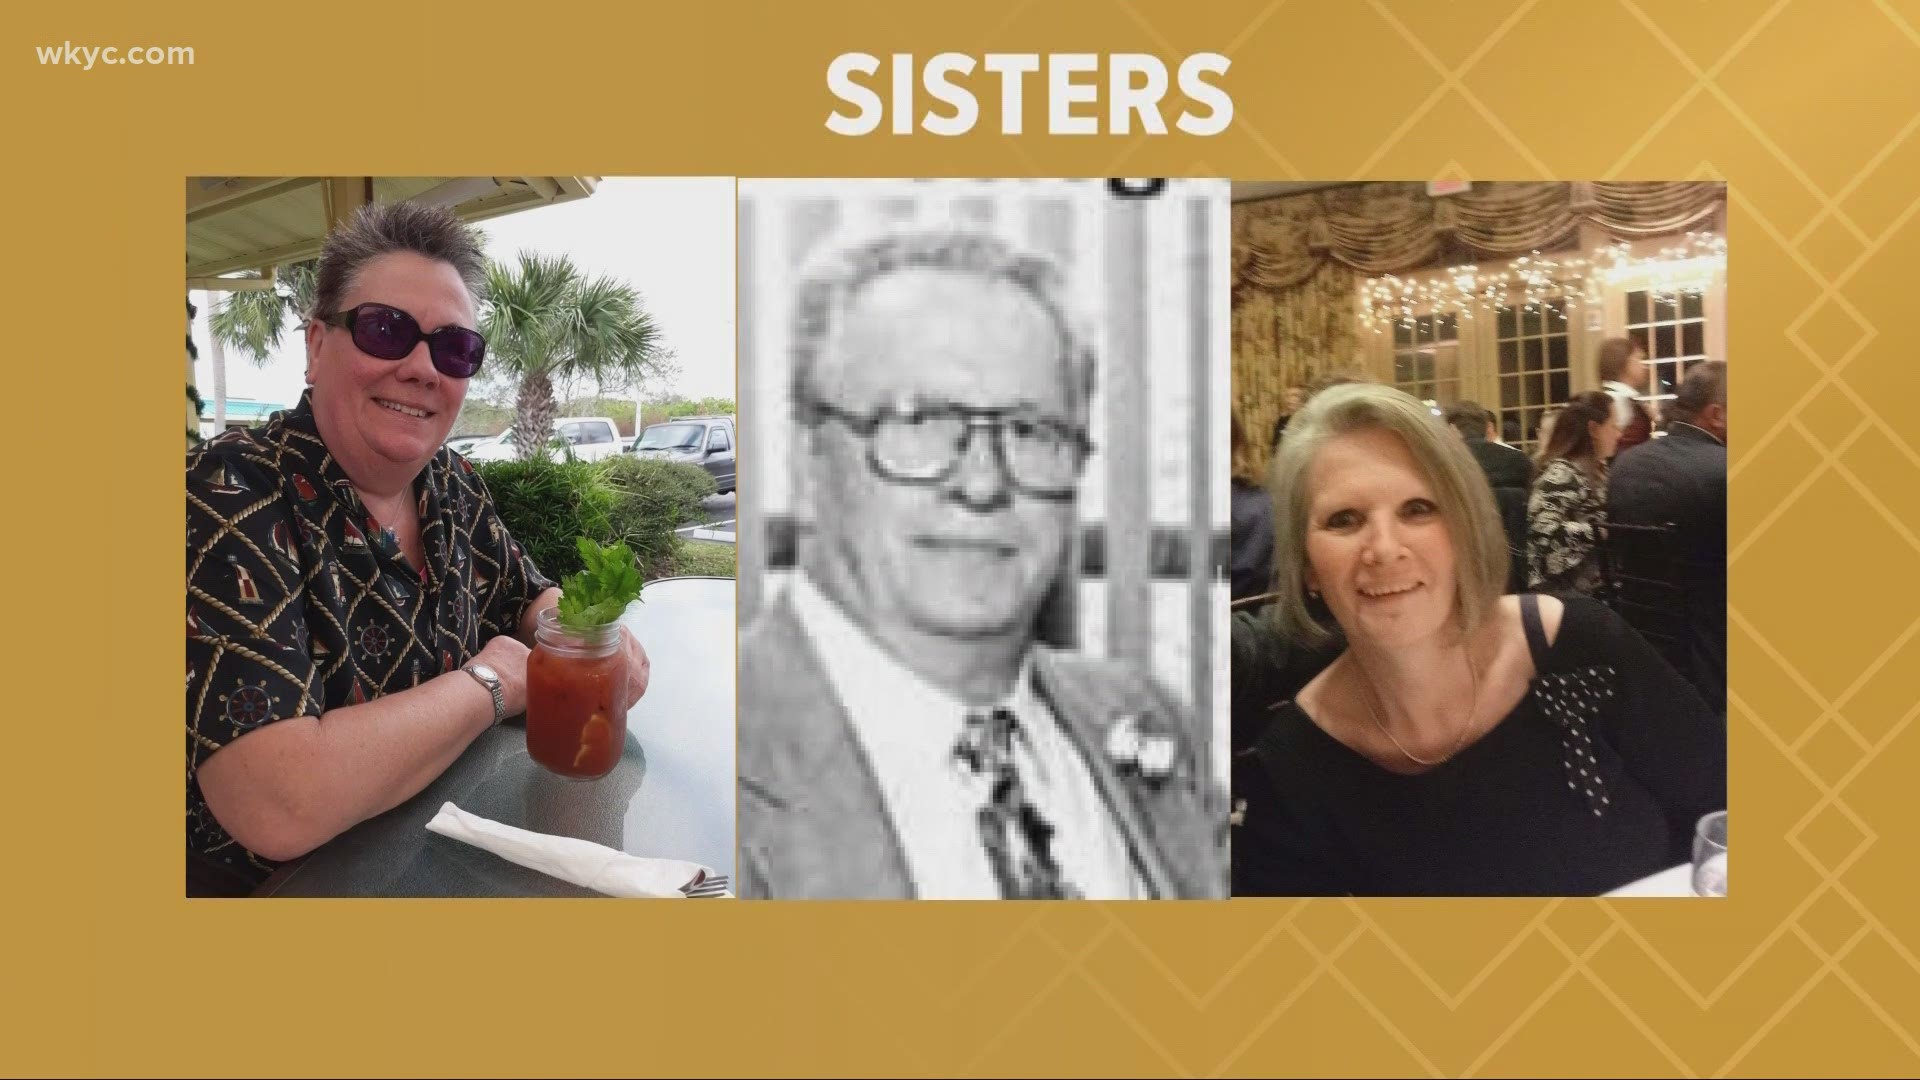 Kim Miller, 62, never imagined what search angels revealed to her about her biological family. Lindsay Buckingham reports.